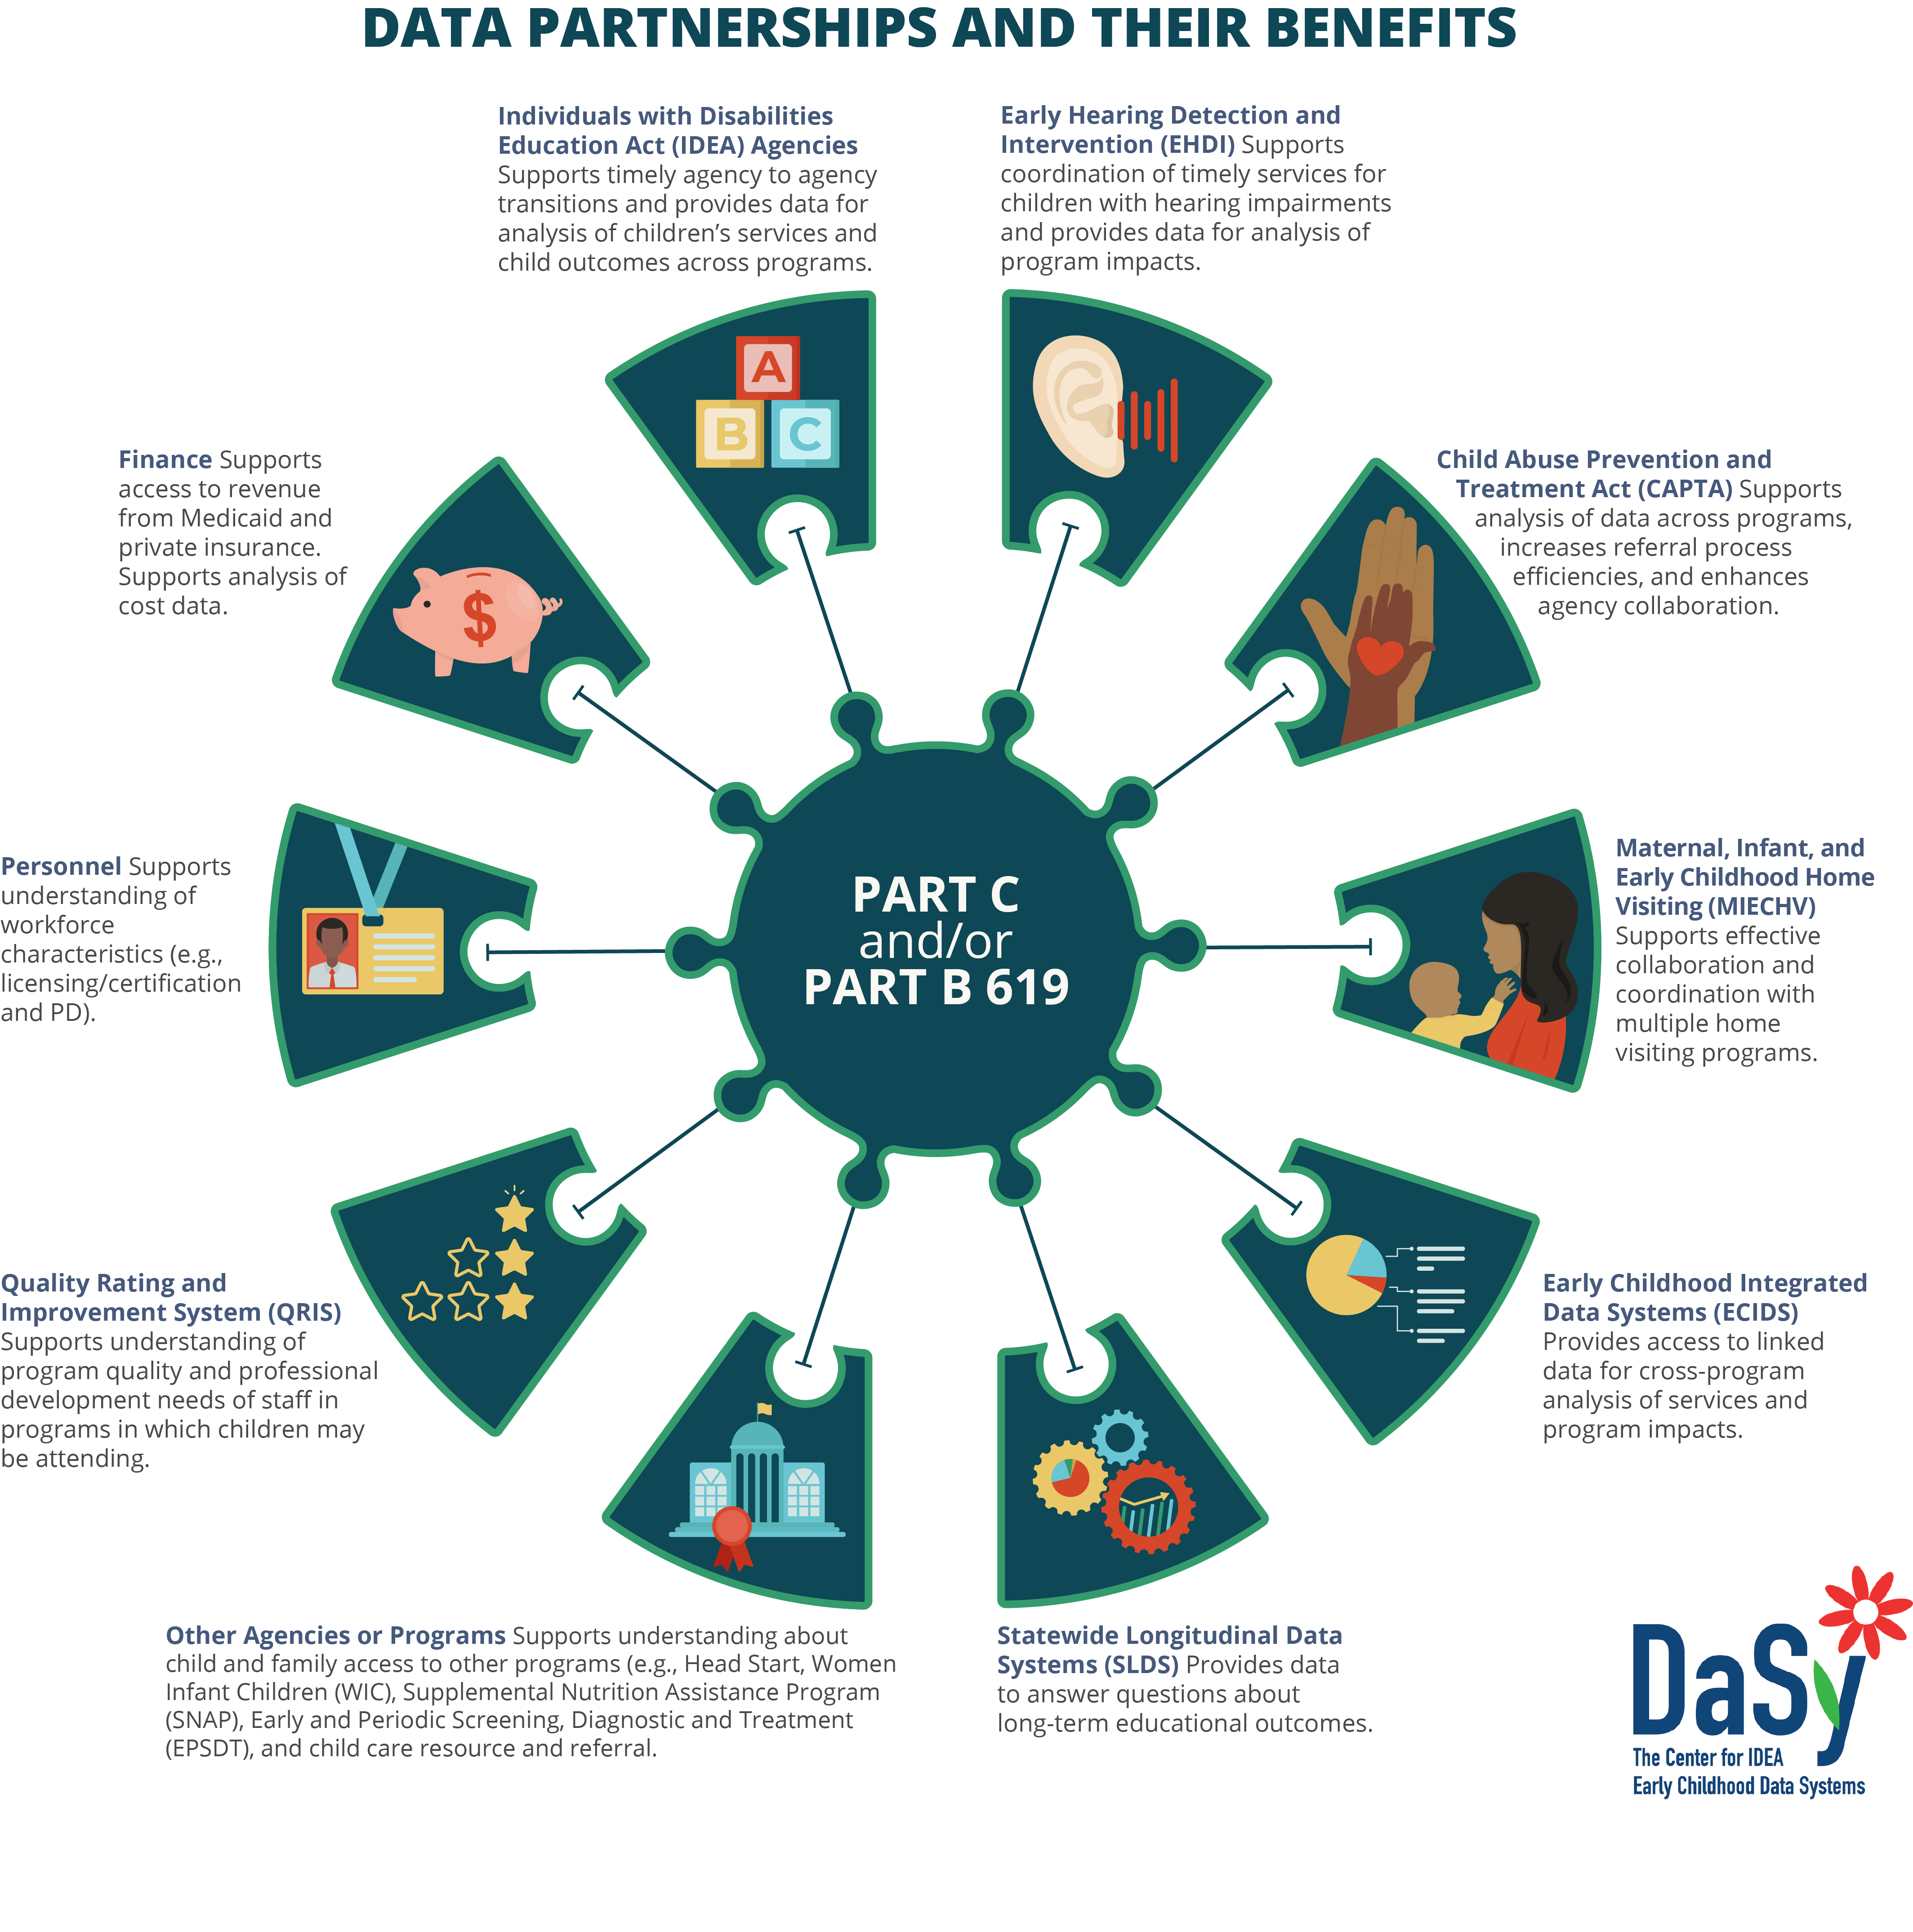 data partnerships and their benefits diagram